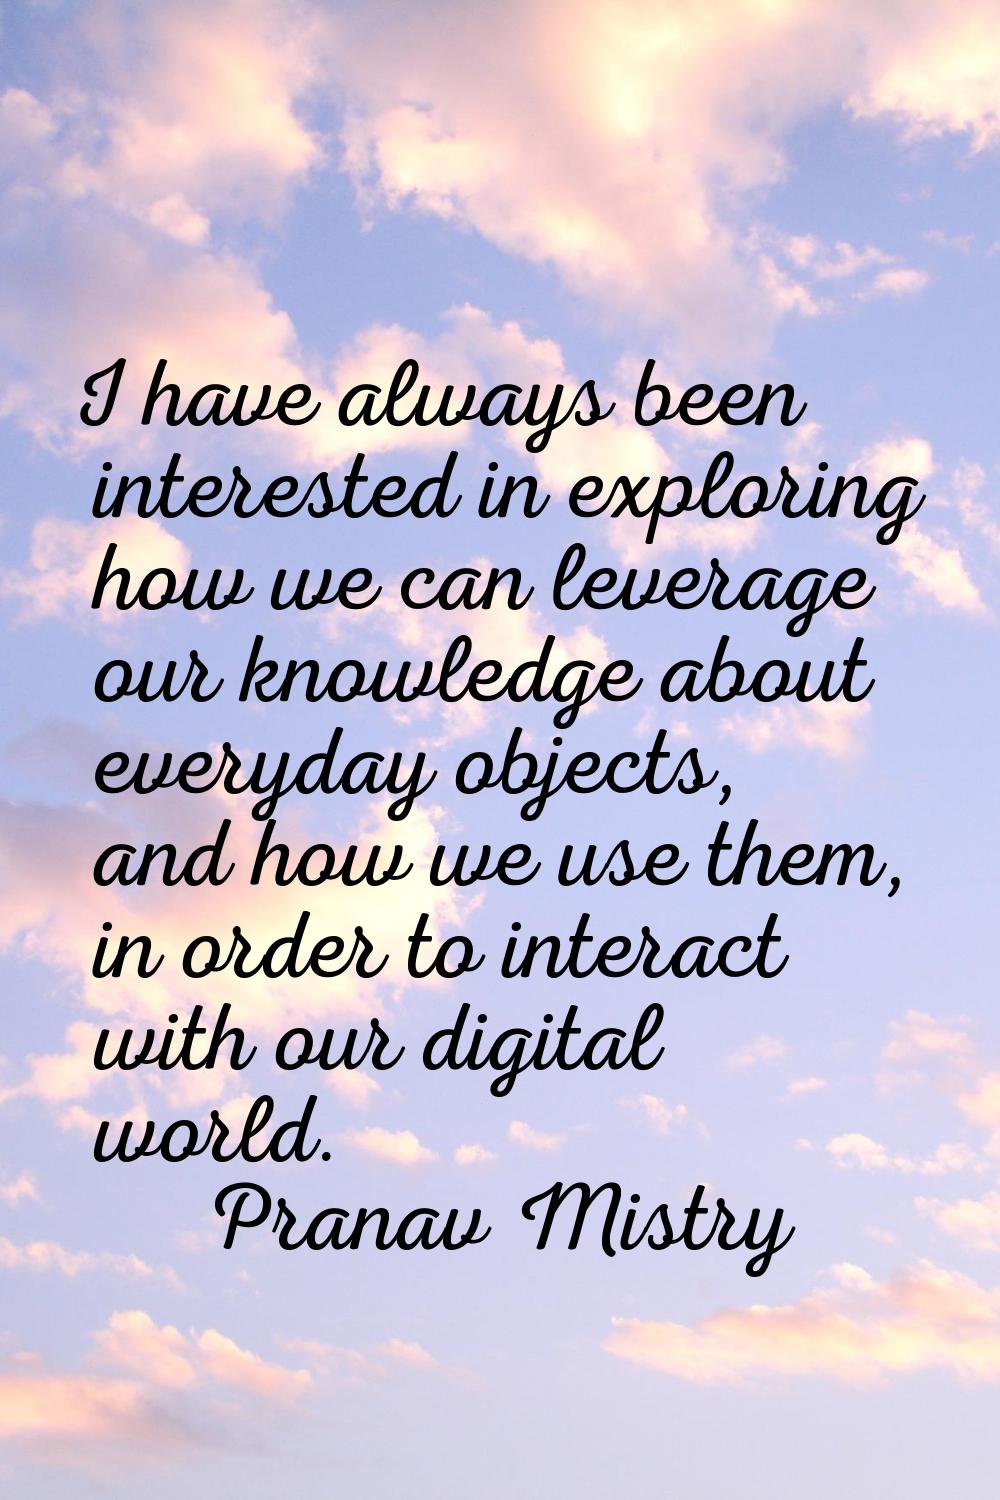 I have always been interested in exploring how we can leverage our knowledge about everyday objects